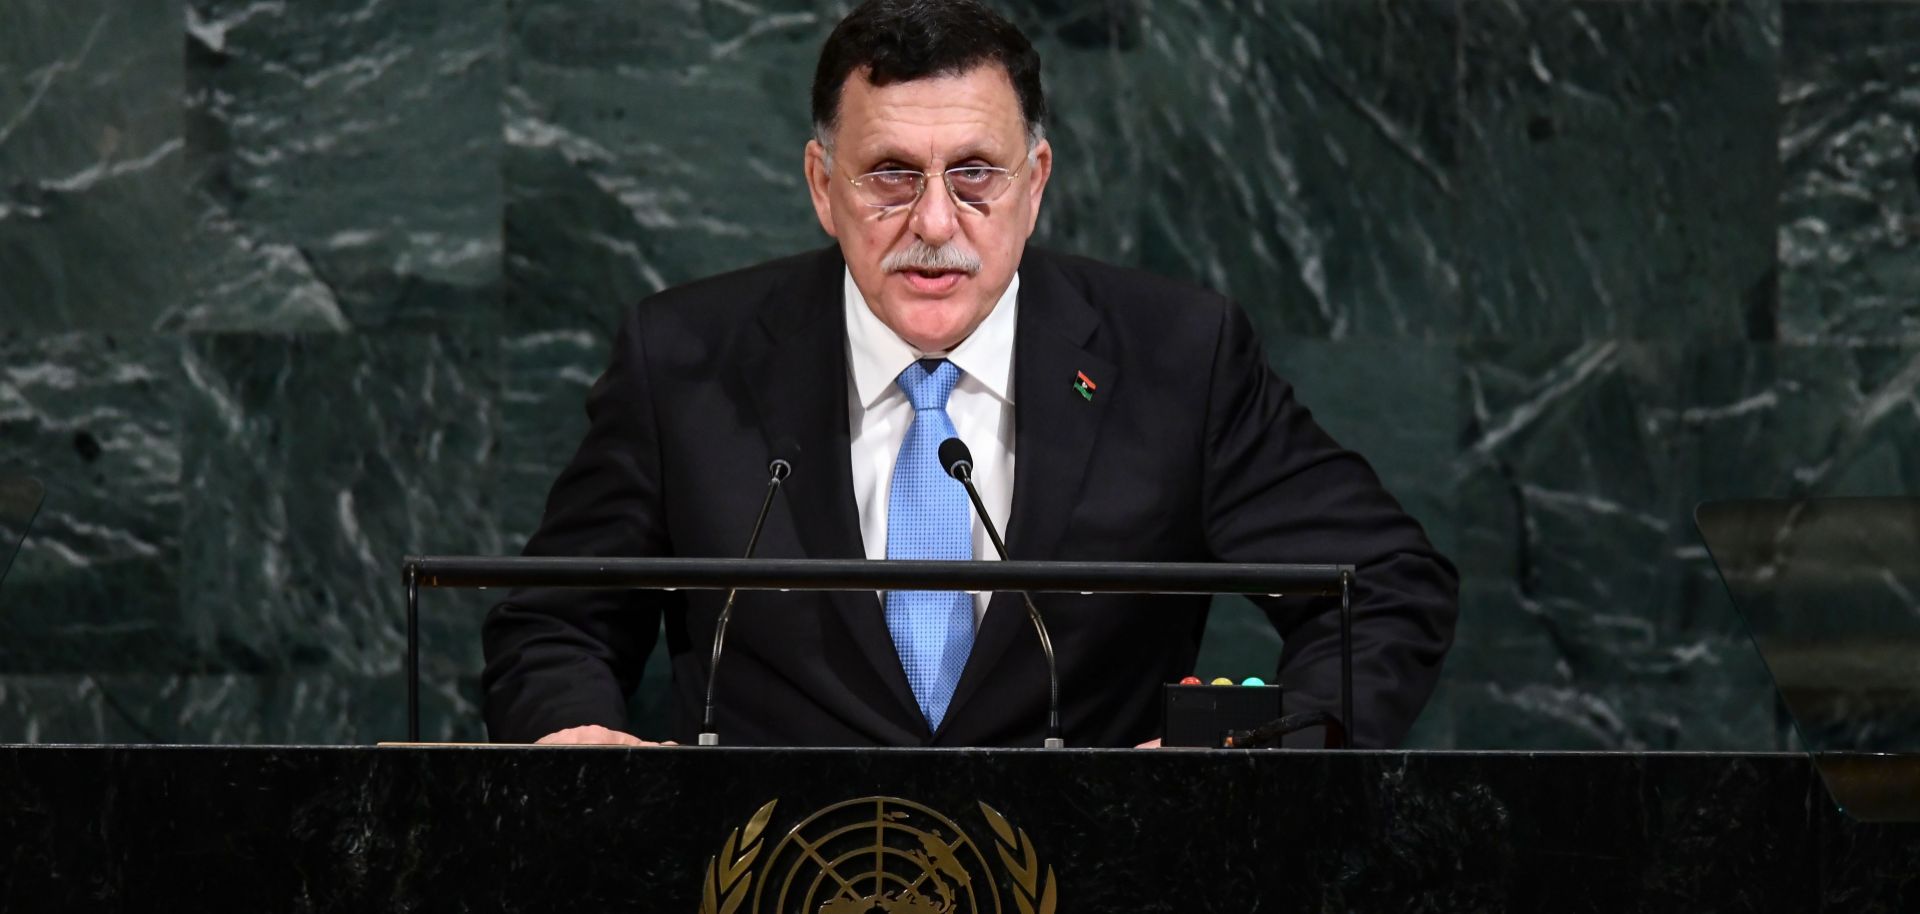 The head of Libya's internationally recognized Government of National Accord, Fayez al-Sarraj, addresses the 72nd Session of the U.N. General Assembly in New York on Sept. 20, 2017. 